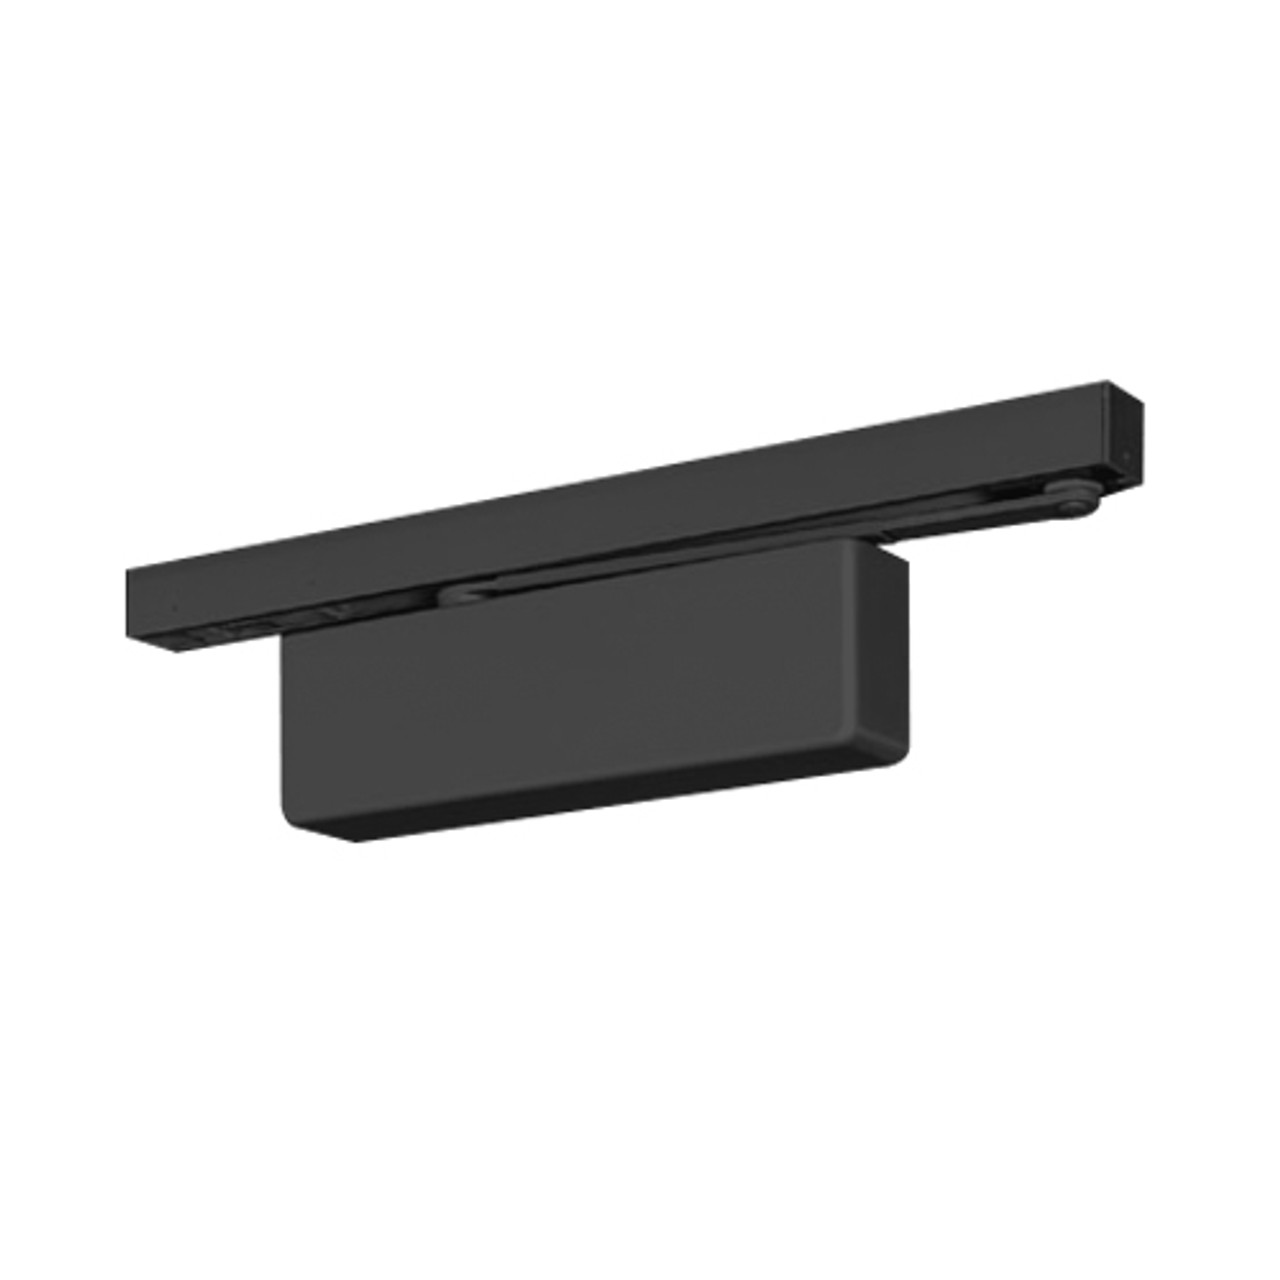 P4410ST-693 Yale 4400 Series Institutional Door Closer with Push Side Slide Track Arm in Black